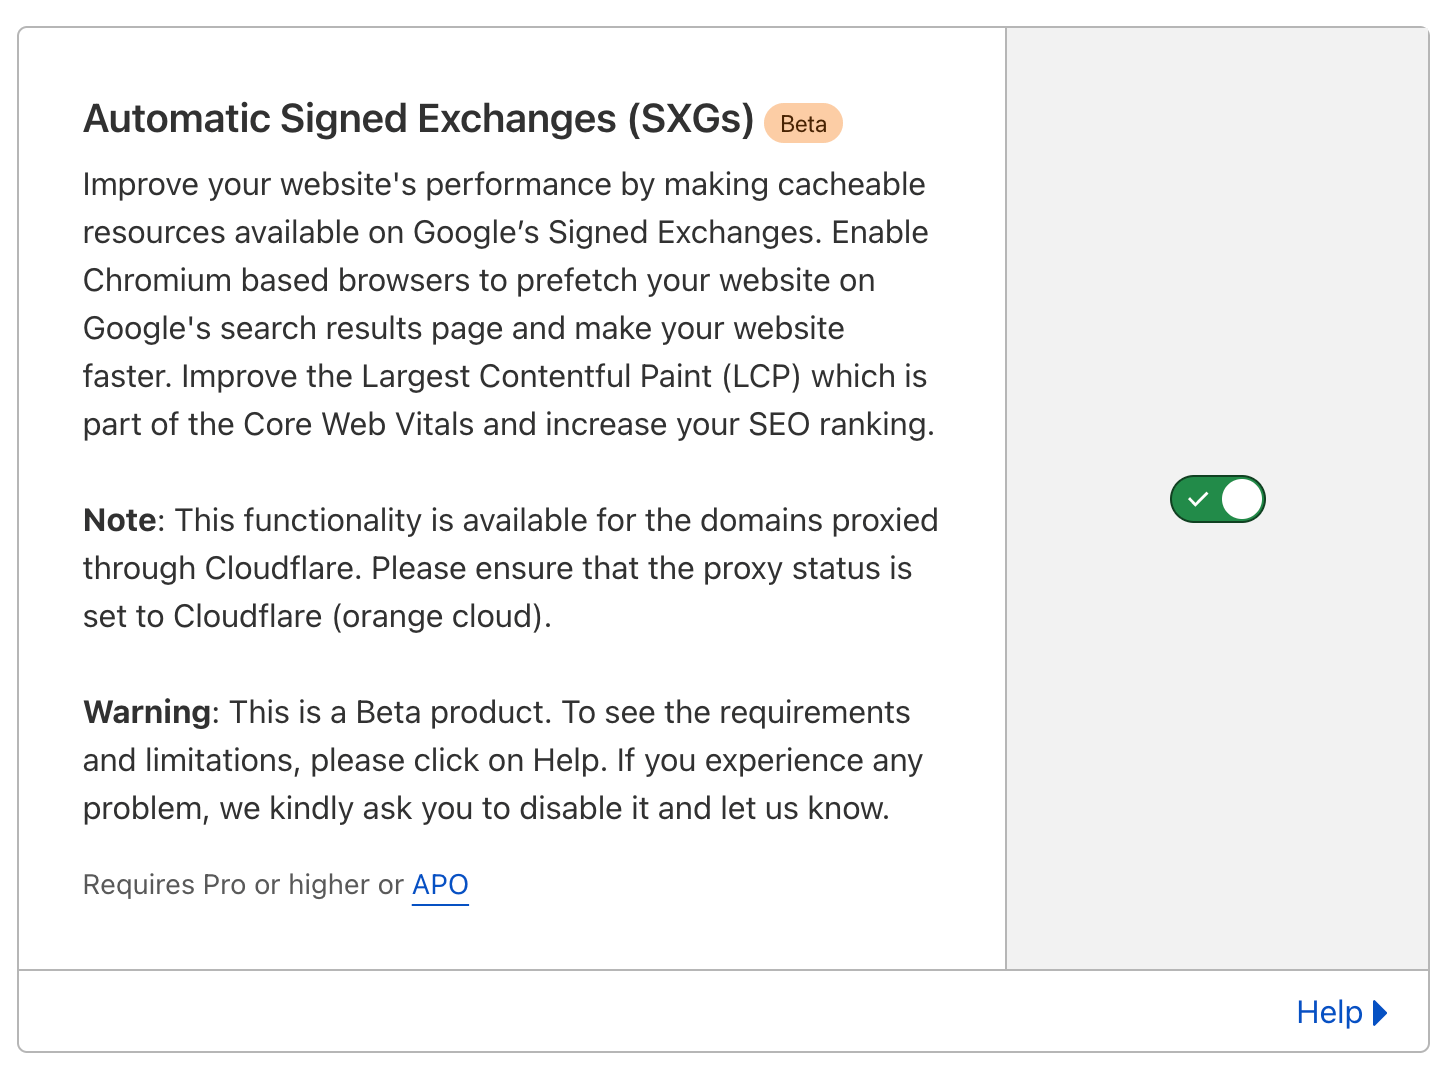 Cloudflare での Automatic Signed Exchanges 設定